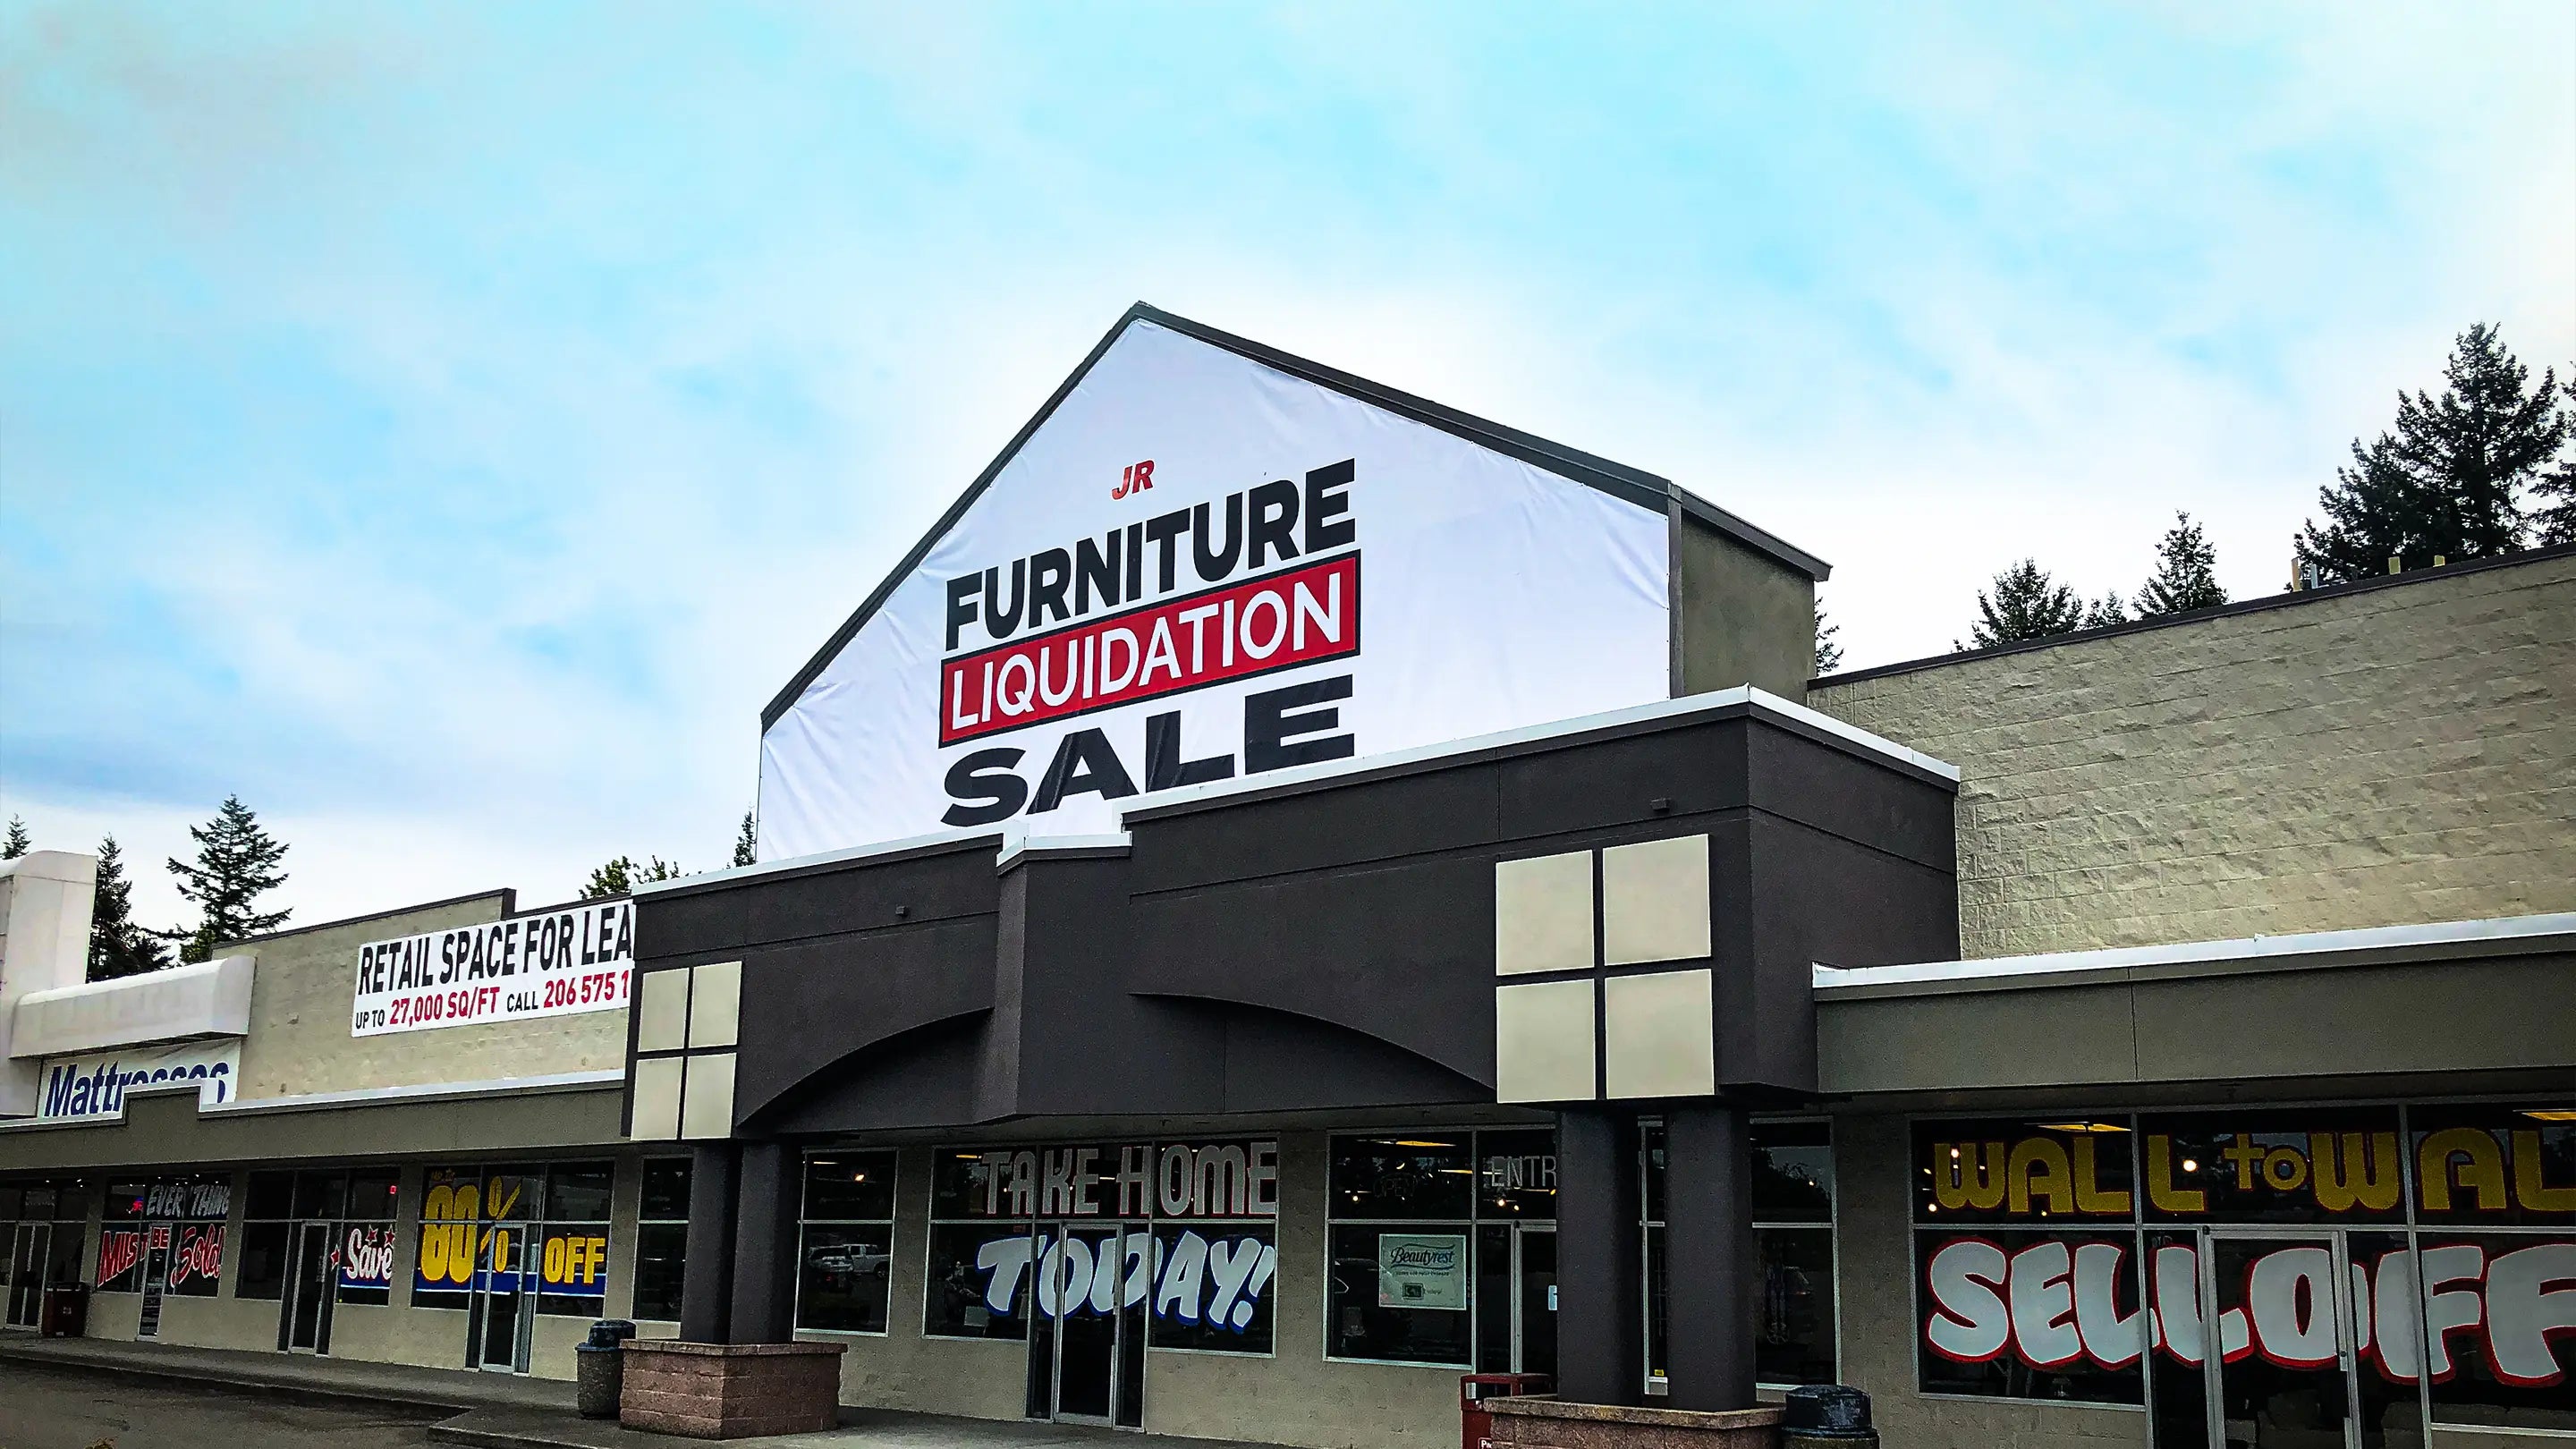 This is a grand format banner we printed for JR Furniture, in Tukwila, WA. We have done a large variety of banner printing and sign making for JR's Furniture stores.